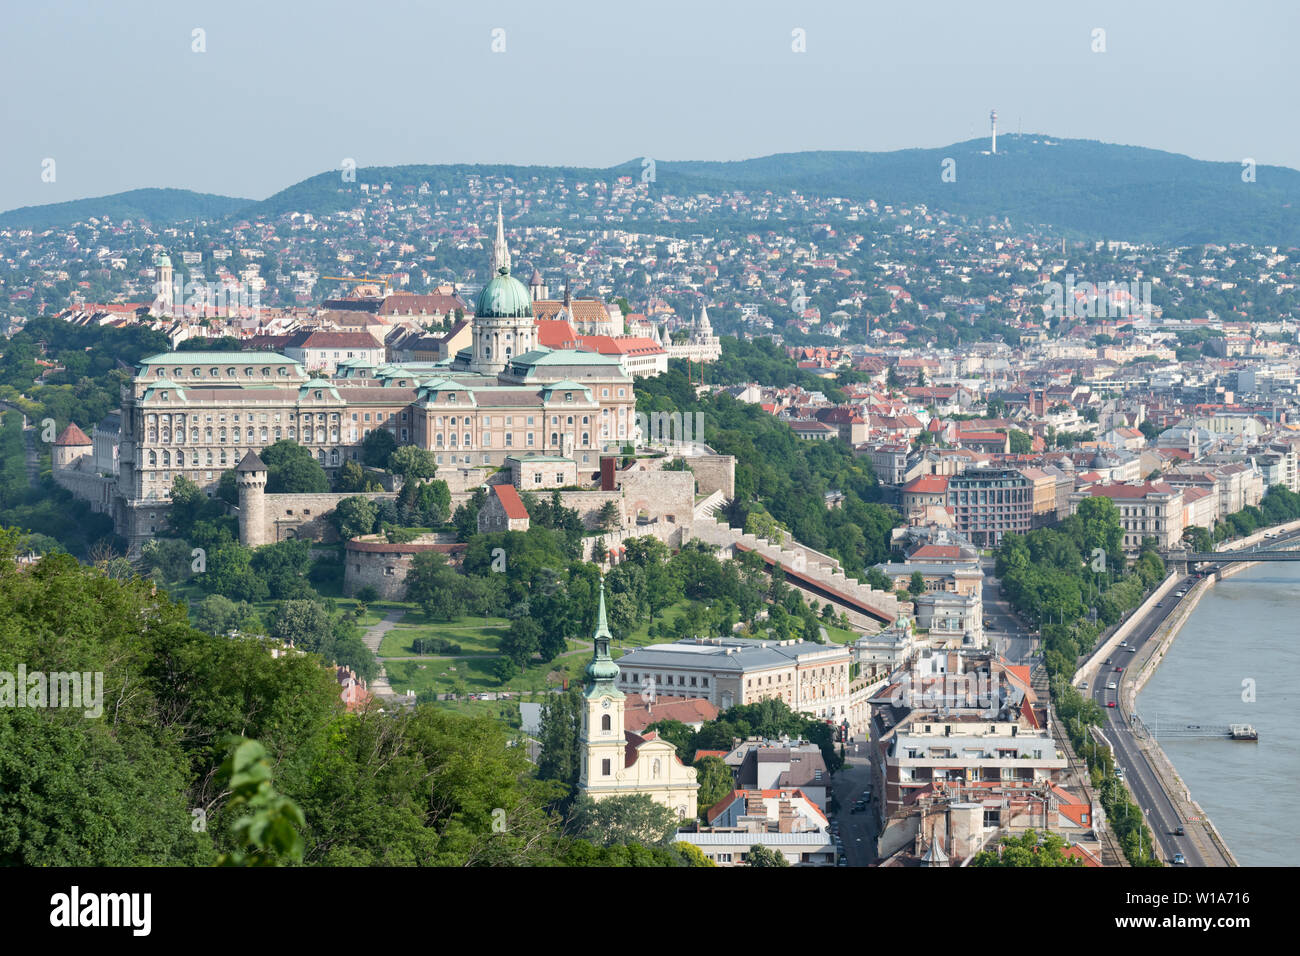 Budapest, Hungary - June 10 2019: View from the south of Buda Castle on the west bank of the river Danube, with the Buda side of the Hungarian capital Stock Photo